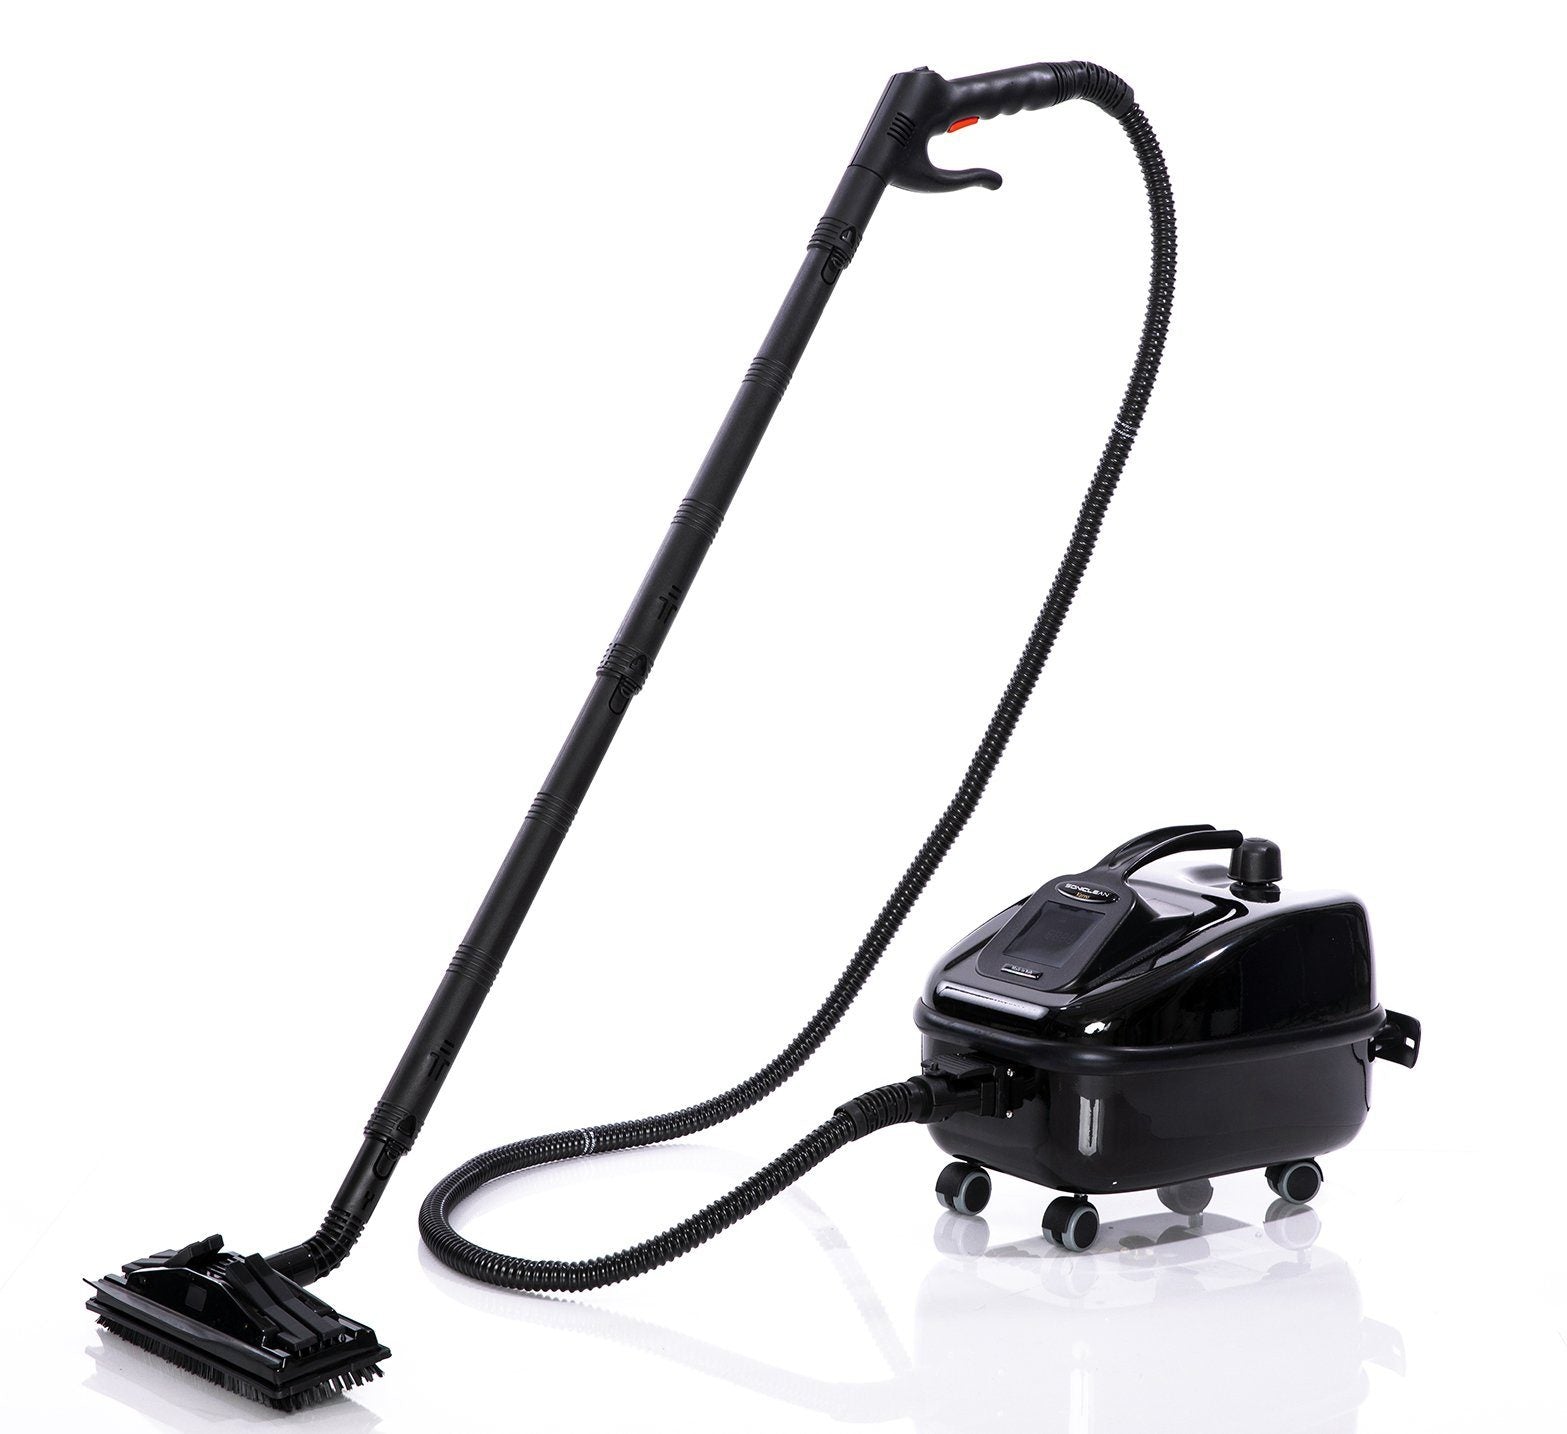 The Dupray SteamMop™ is perfect to clean floors, walls, and